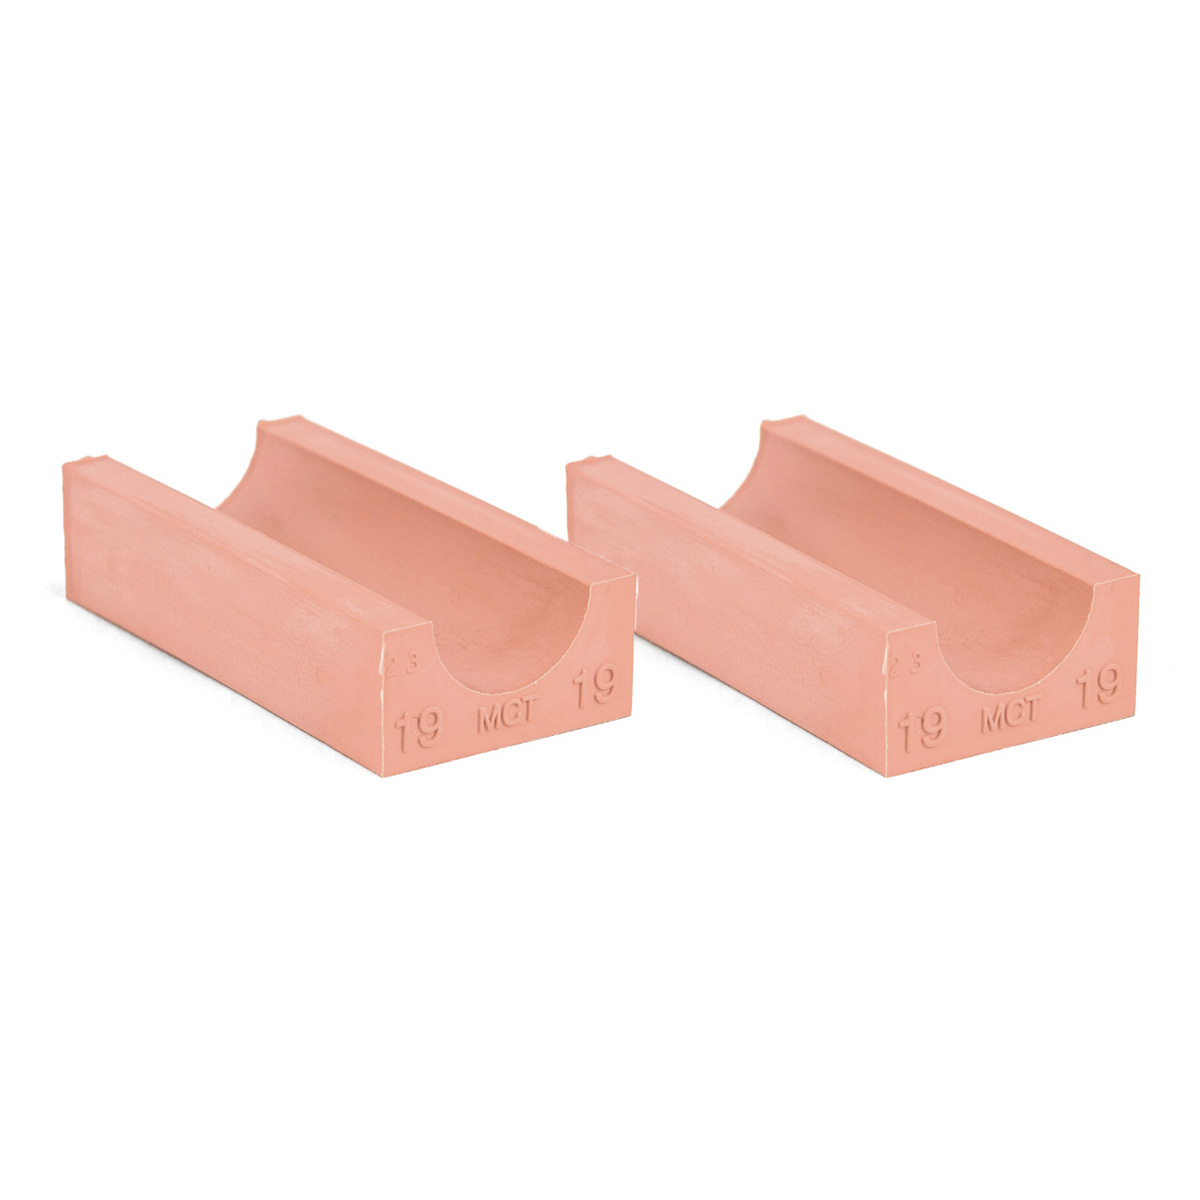 30-19*2 Set of 2 half insert block lycron, 30-19 for cable/pipe diam. 18.5-19.5mm